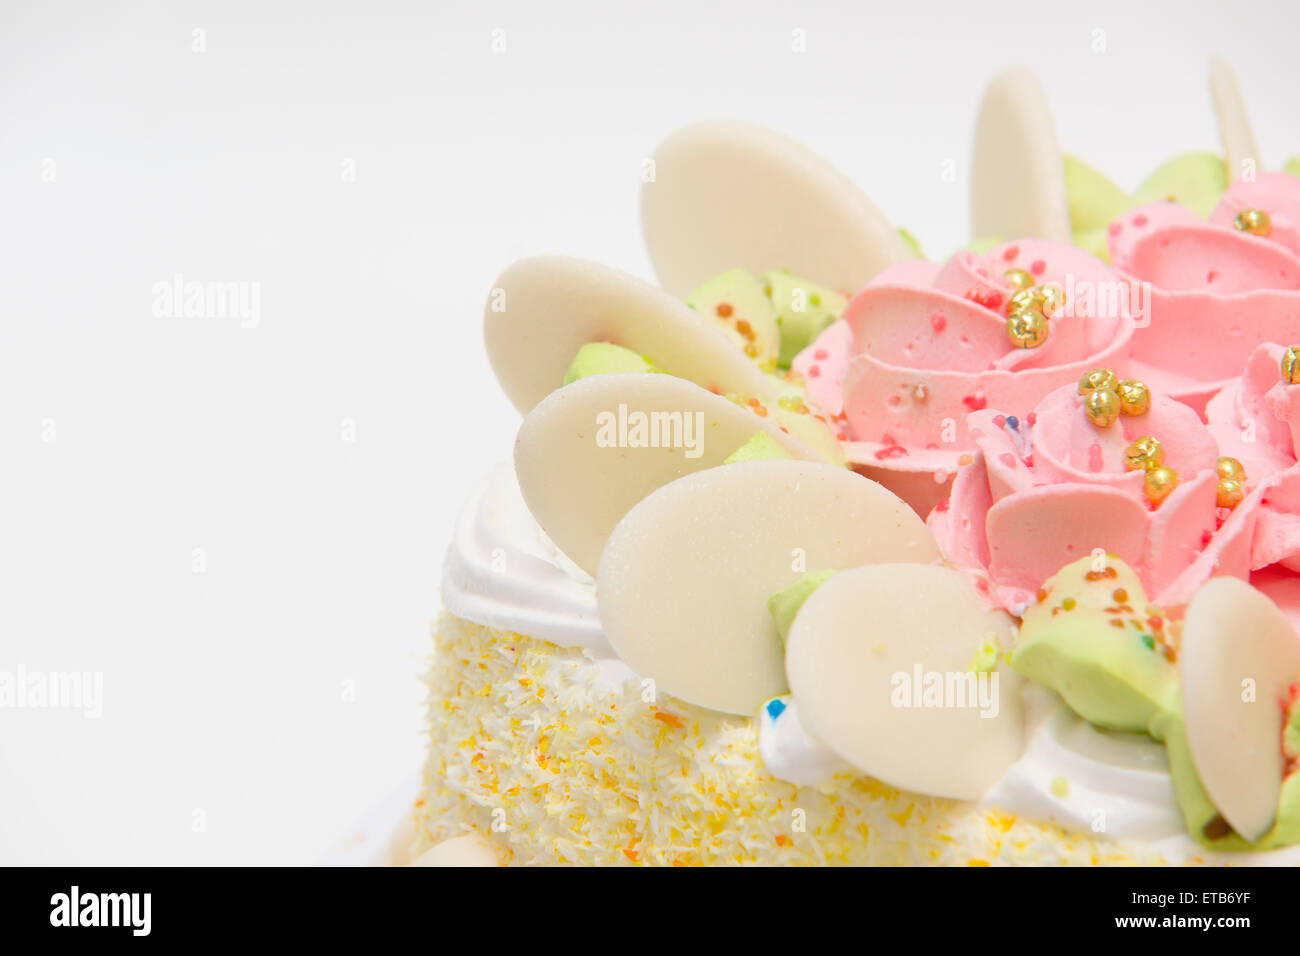 the big sweet pie decorated with cream roses on white background Stock Photo